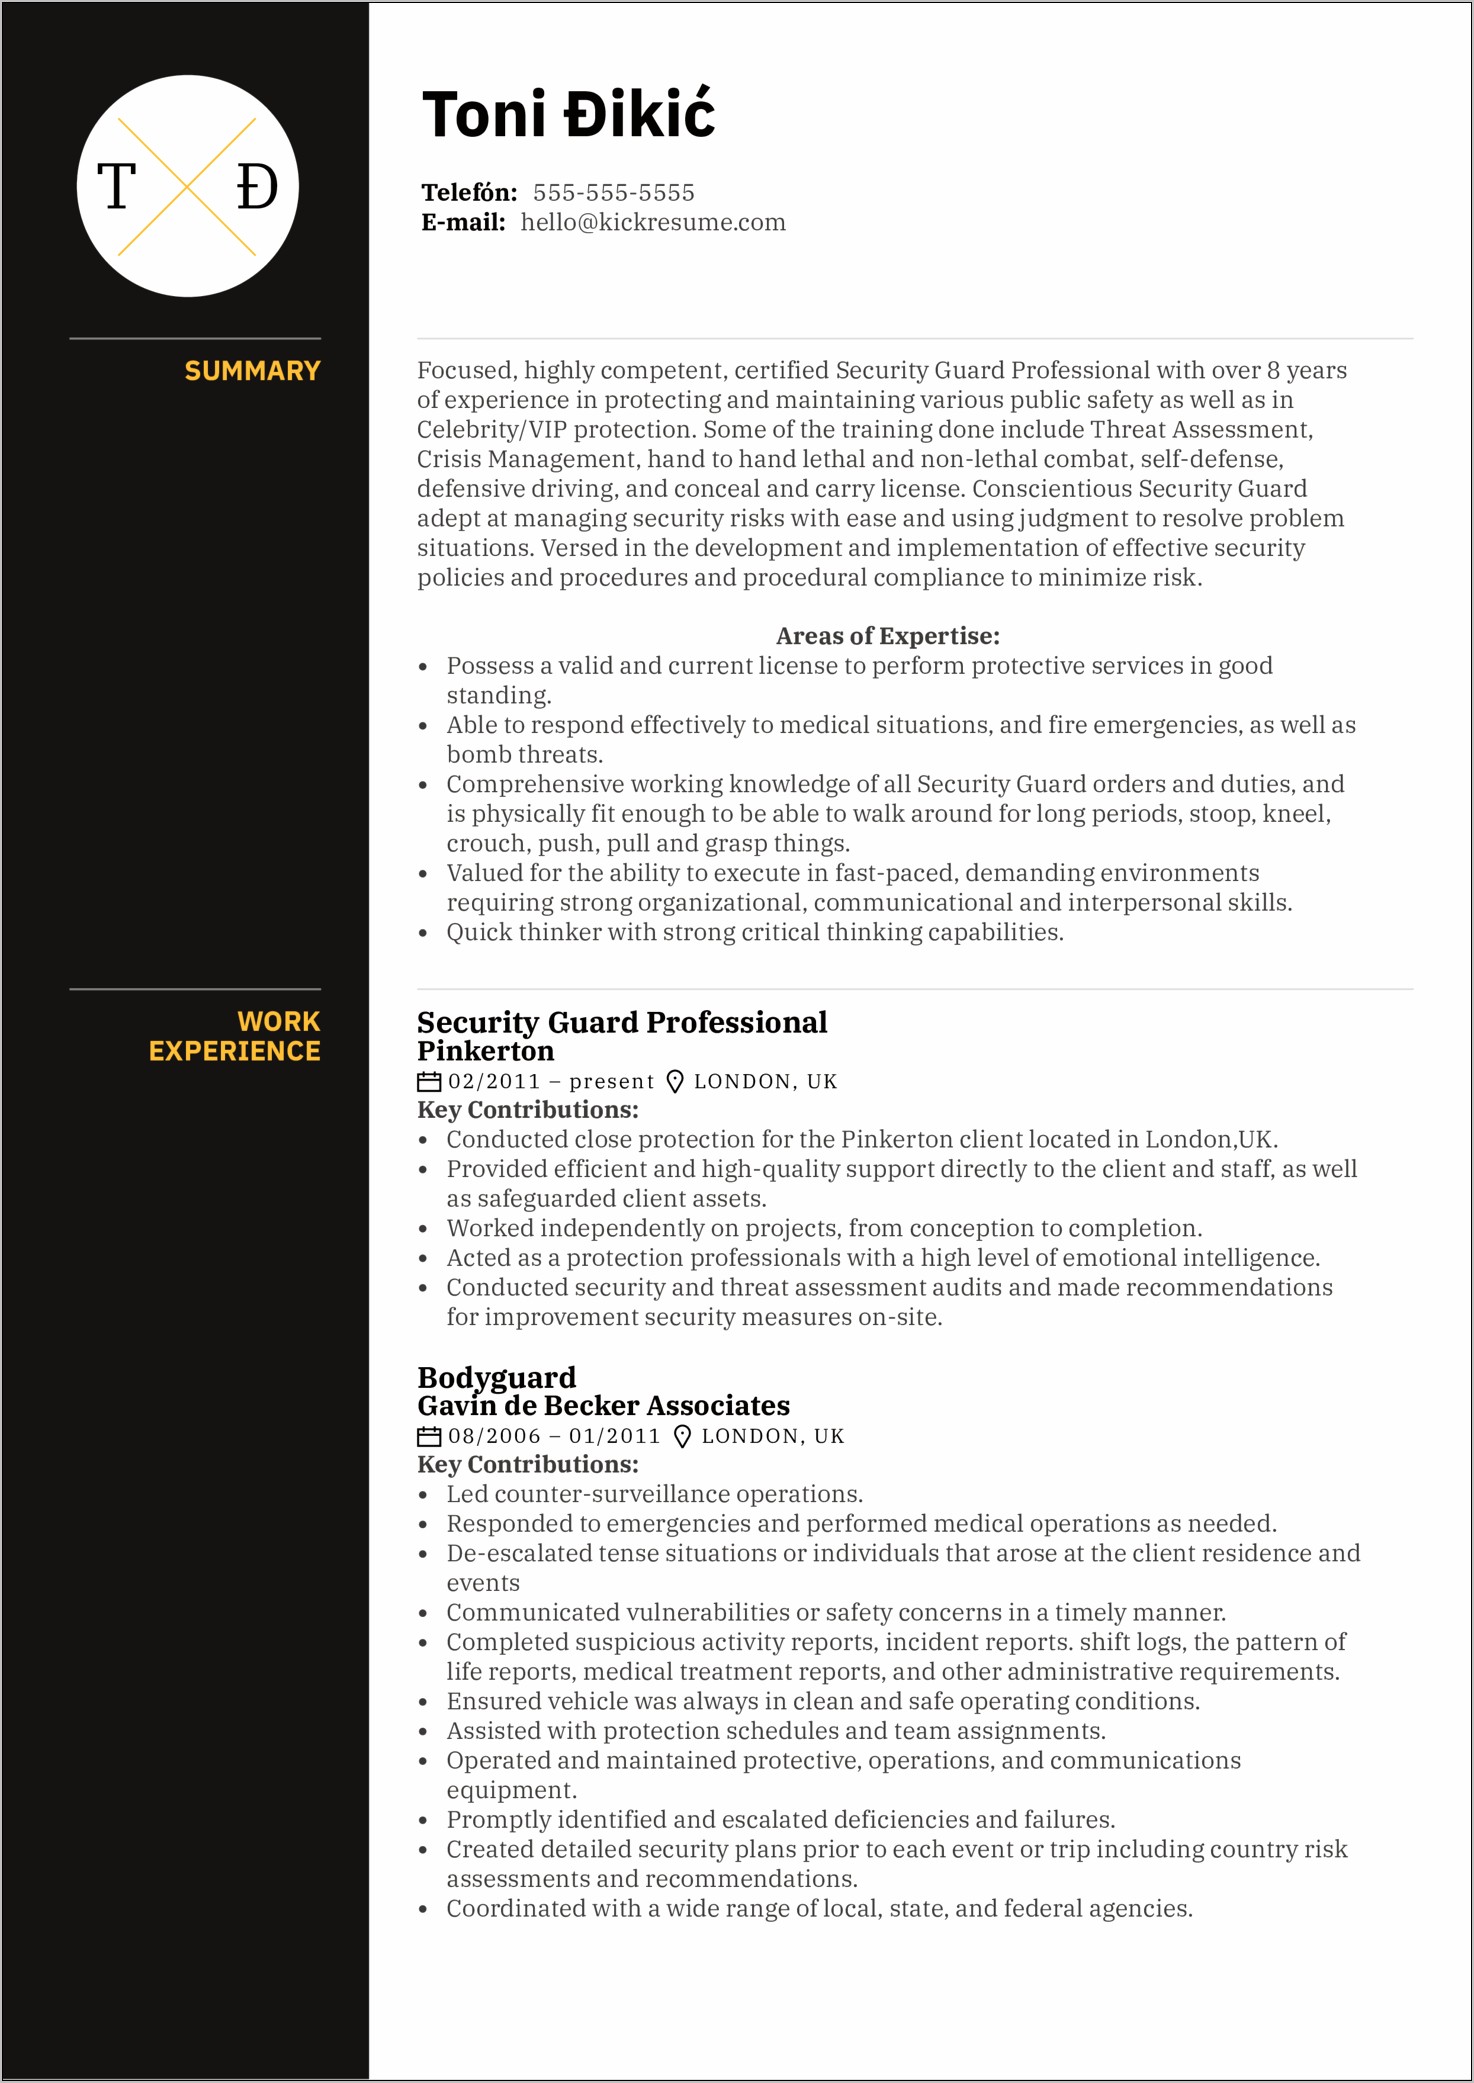 Important Job Skills For Security Guard Resume